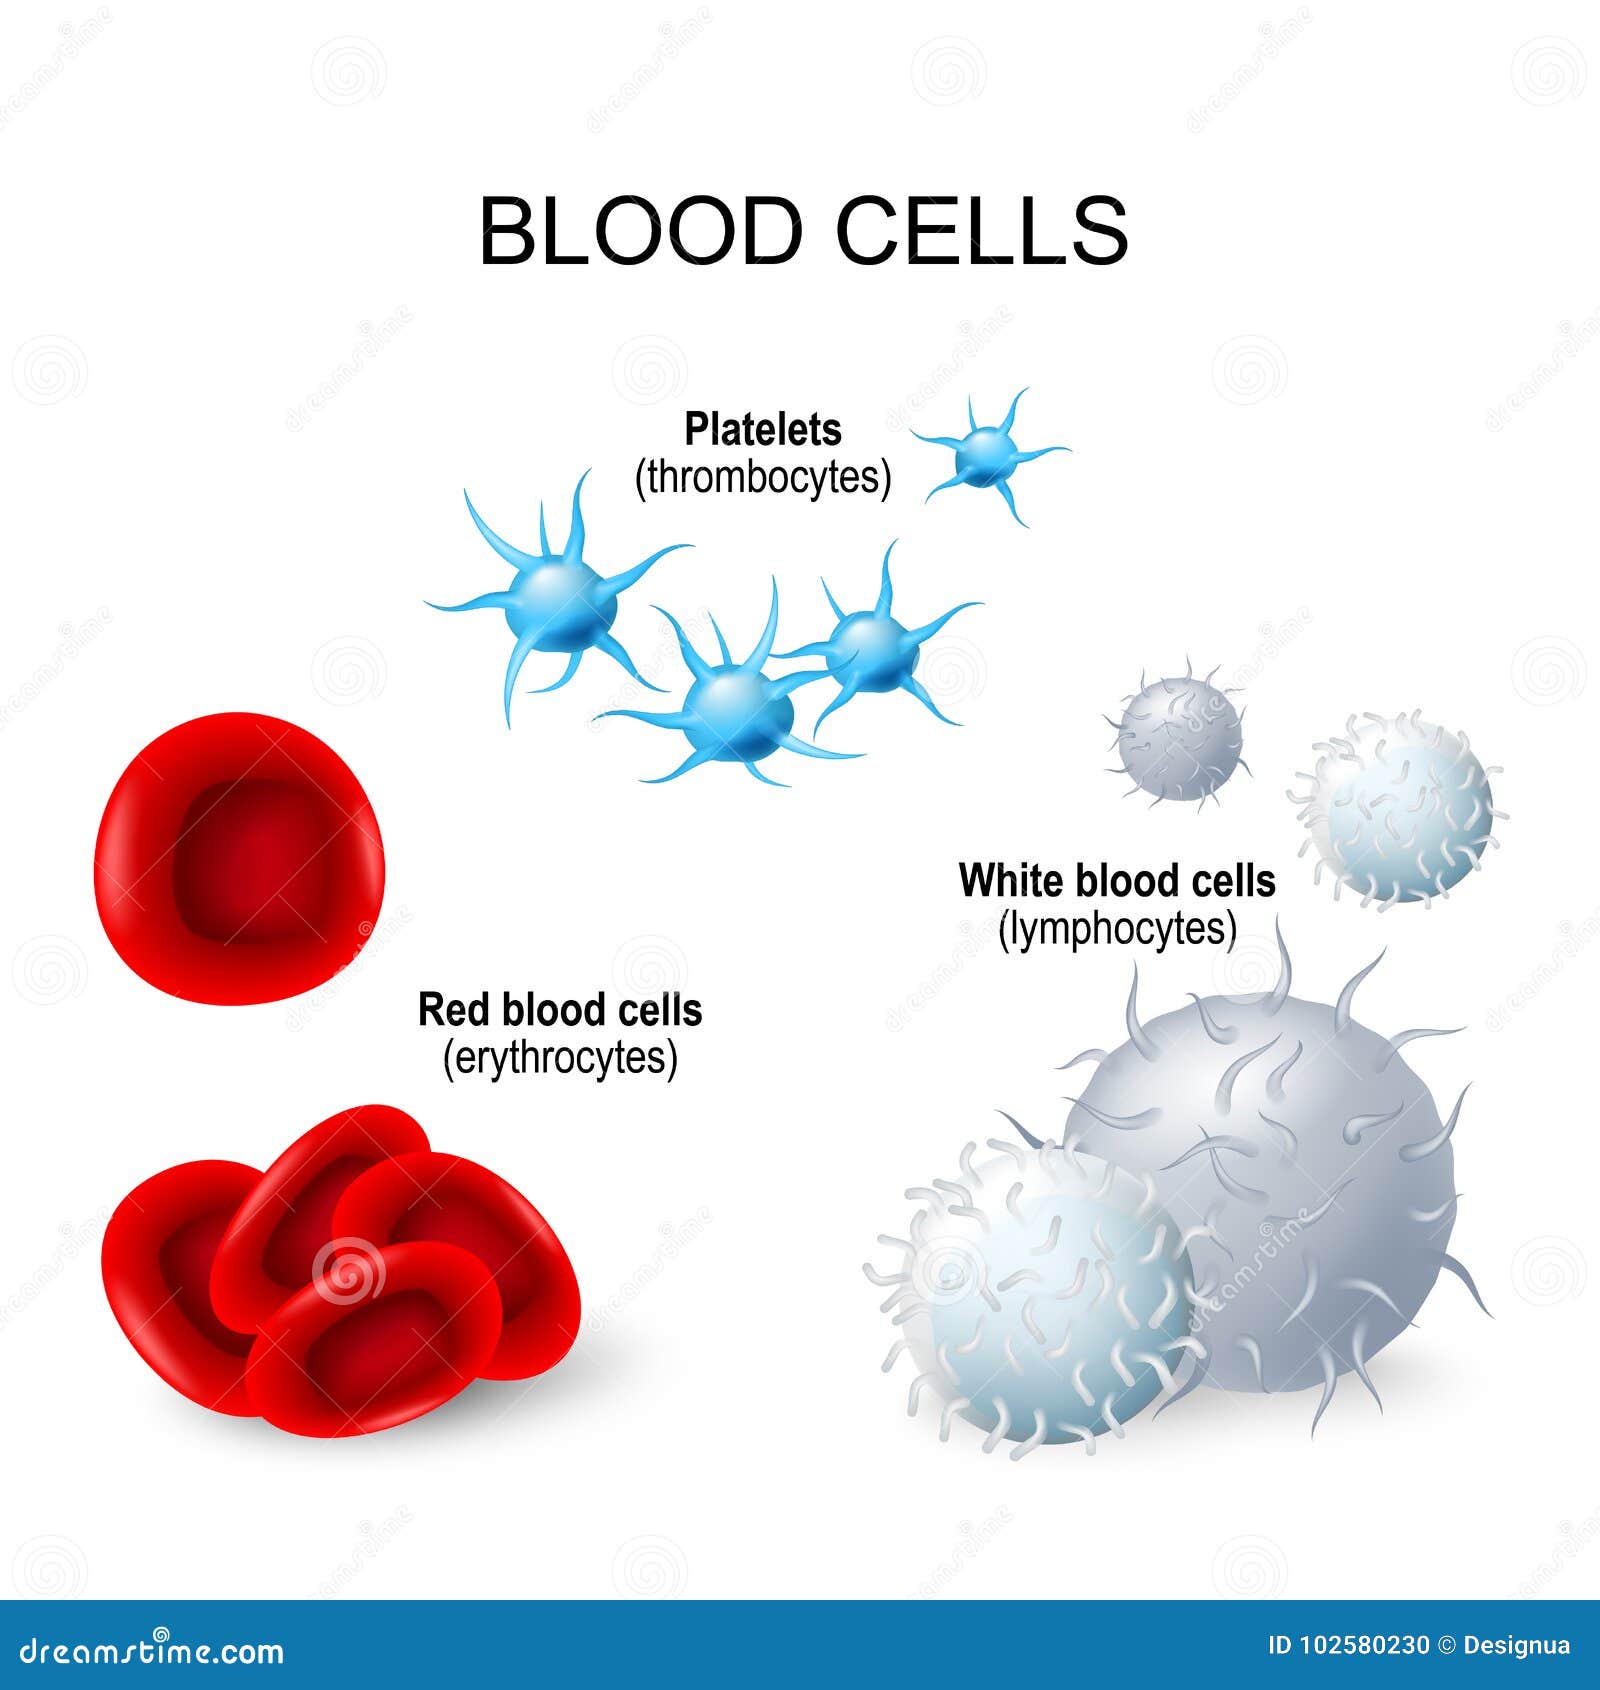 blood cells: platelets, white blood cells and red blood cells